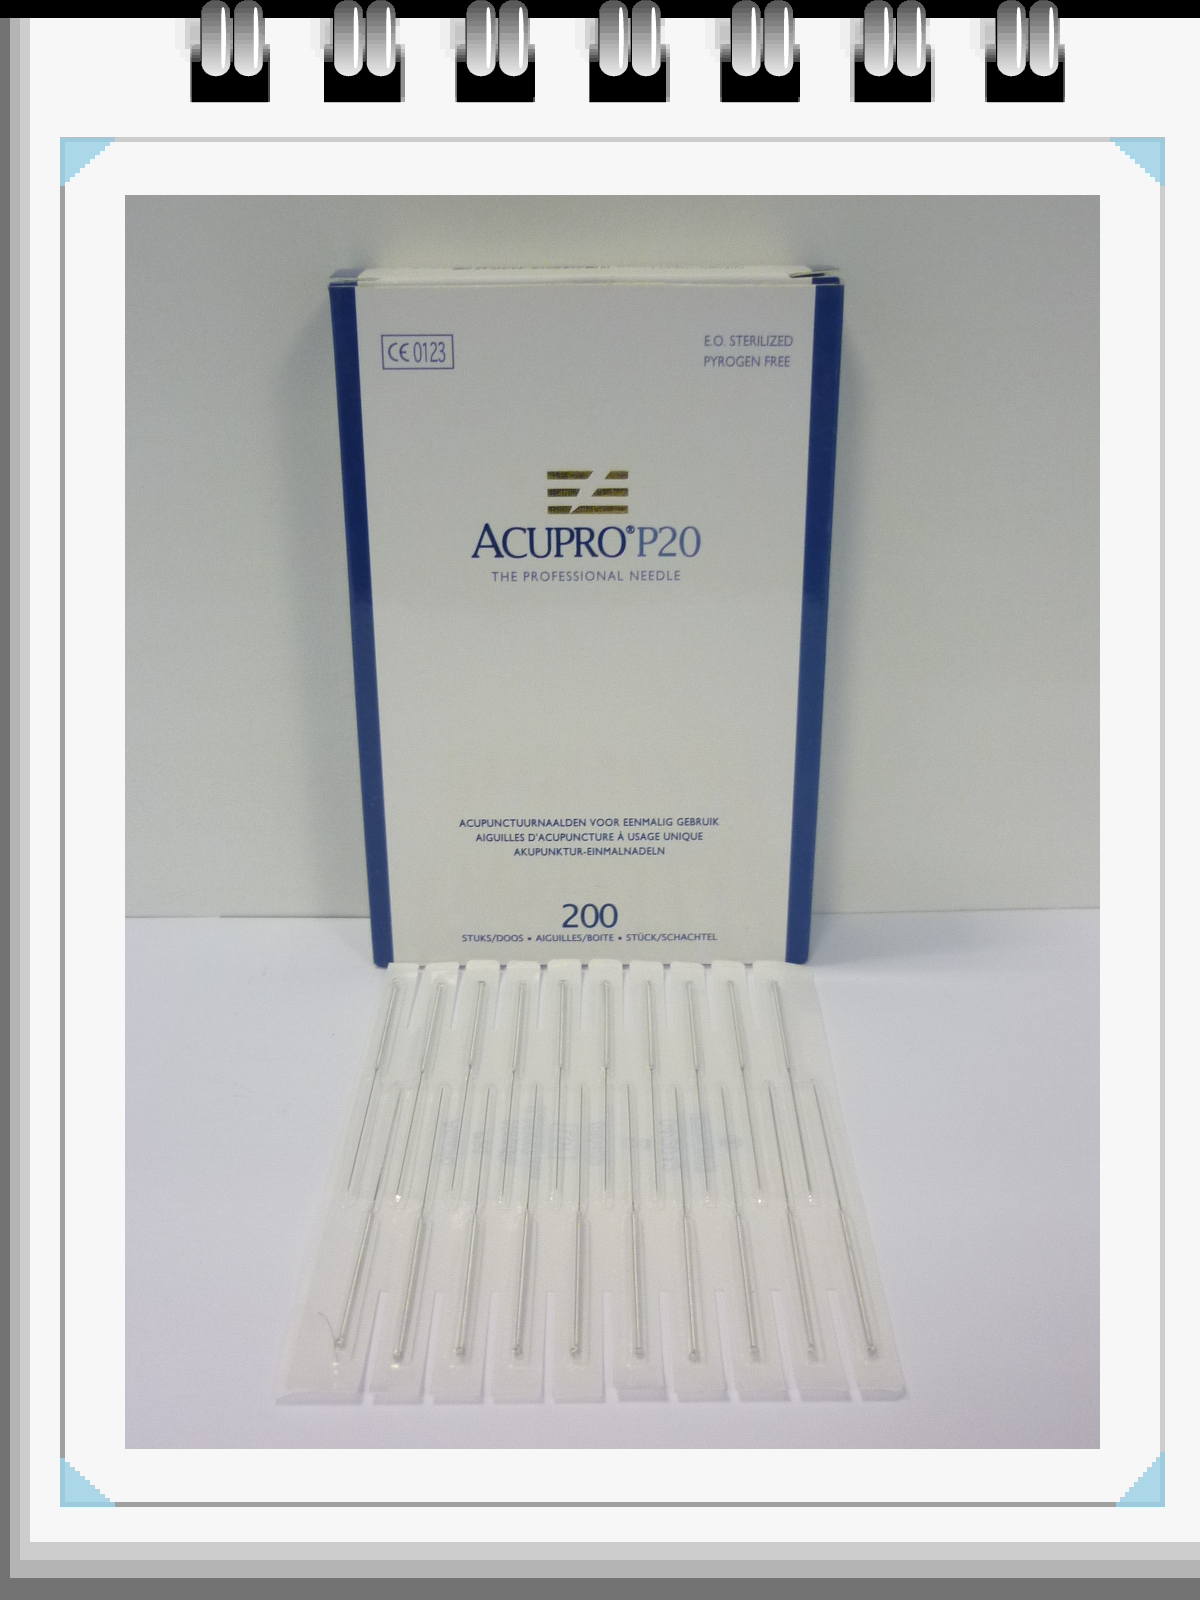 All Products - Acupuncture naalden 0,22 x 50mm - p--200